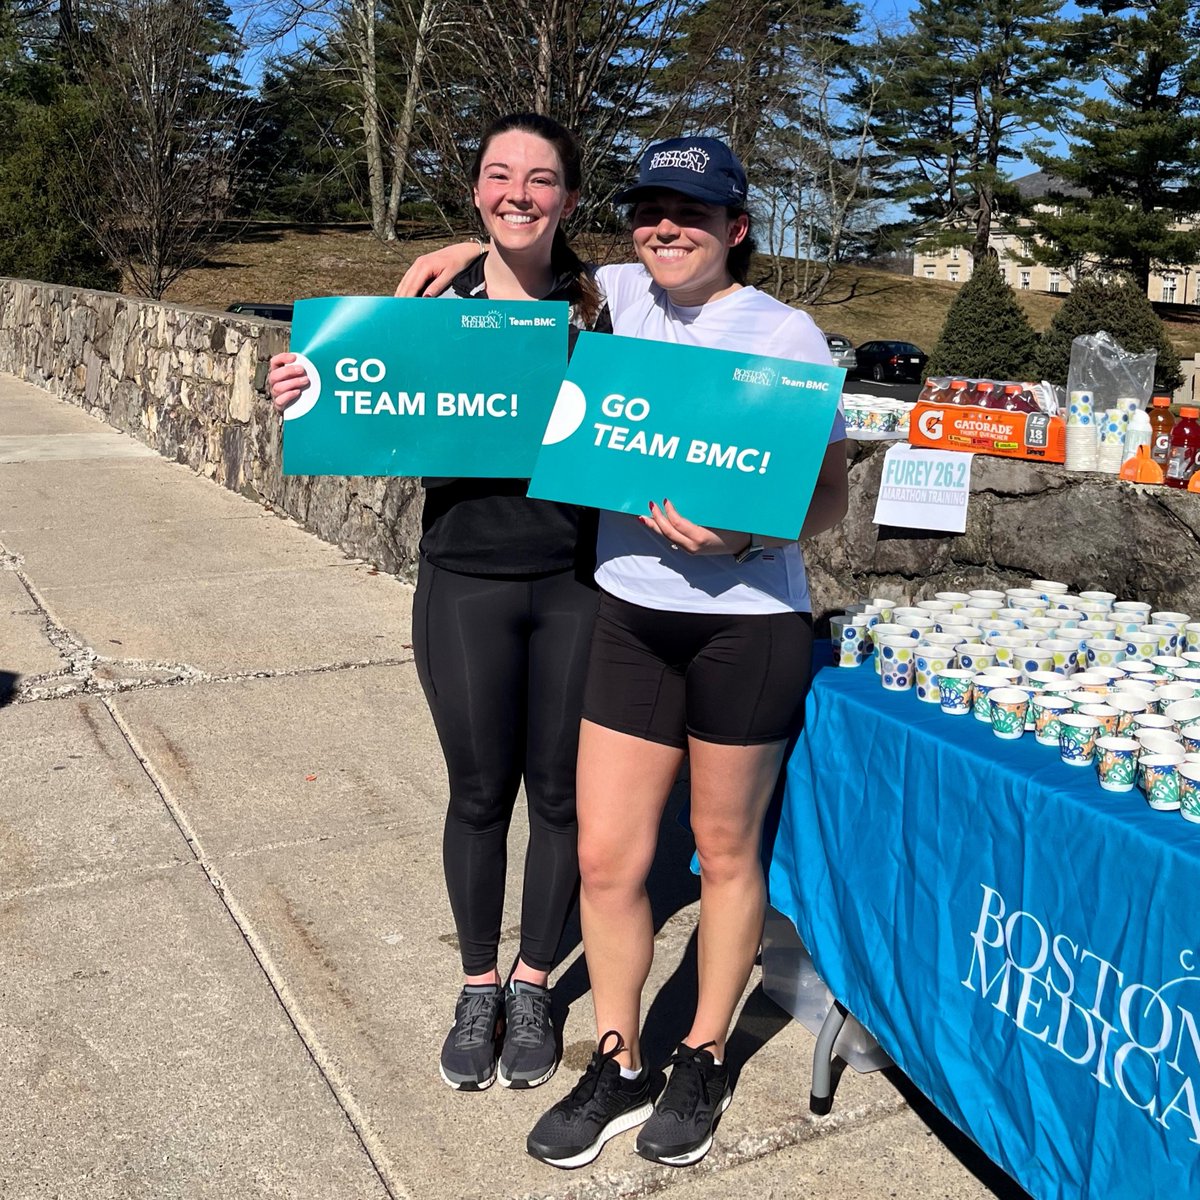 #TeamBMC will take on the 128th @bostonmarathon on Monday, April 15—one week from today! Help inspire our 82 athletes to the finish line. Sign a poster online by Wednesday, April 10 to be displayed at our mile 17 #BMC cheering section on race day: bit.ly/3xoOAPQ